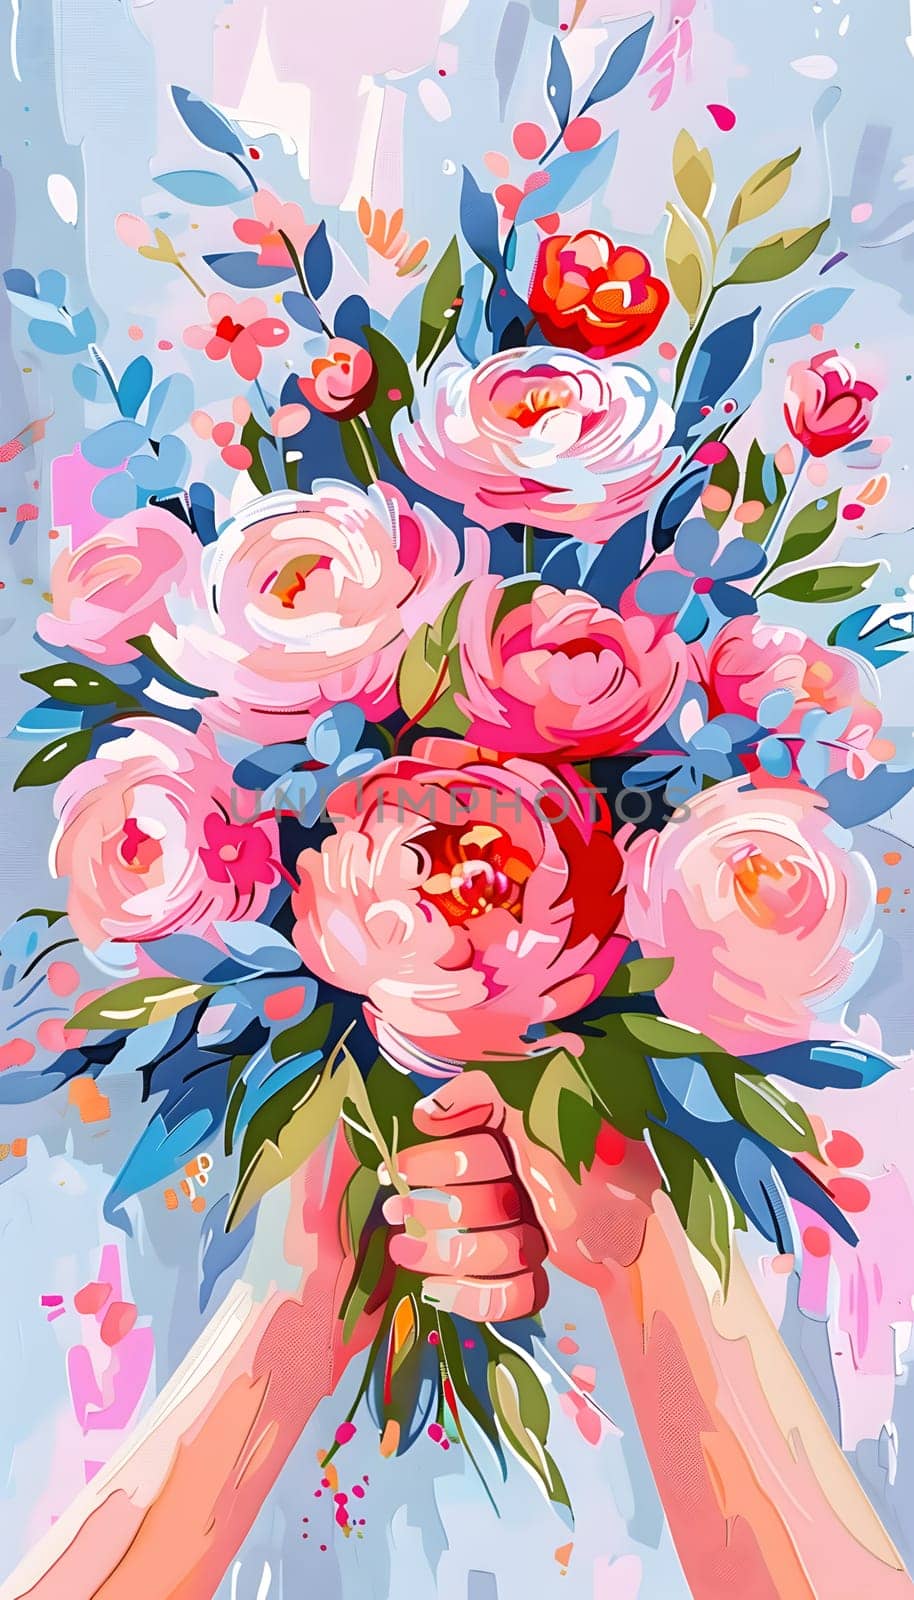 A painting depicting two hands delicately holding a bouquet of pink and blue flowers, showcasing the beauty of nature through art